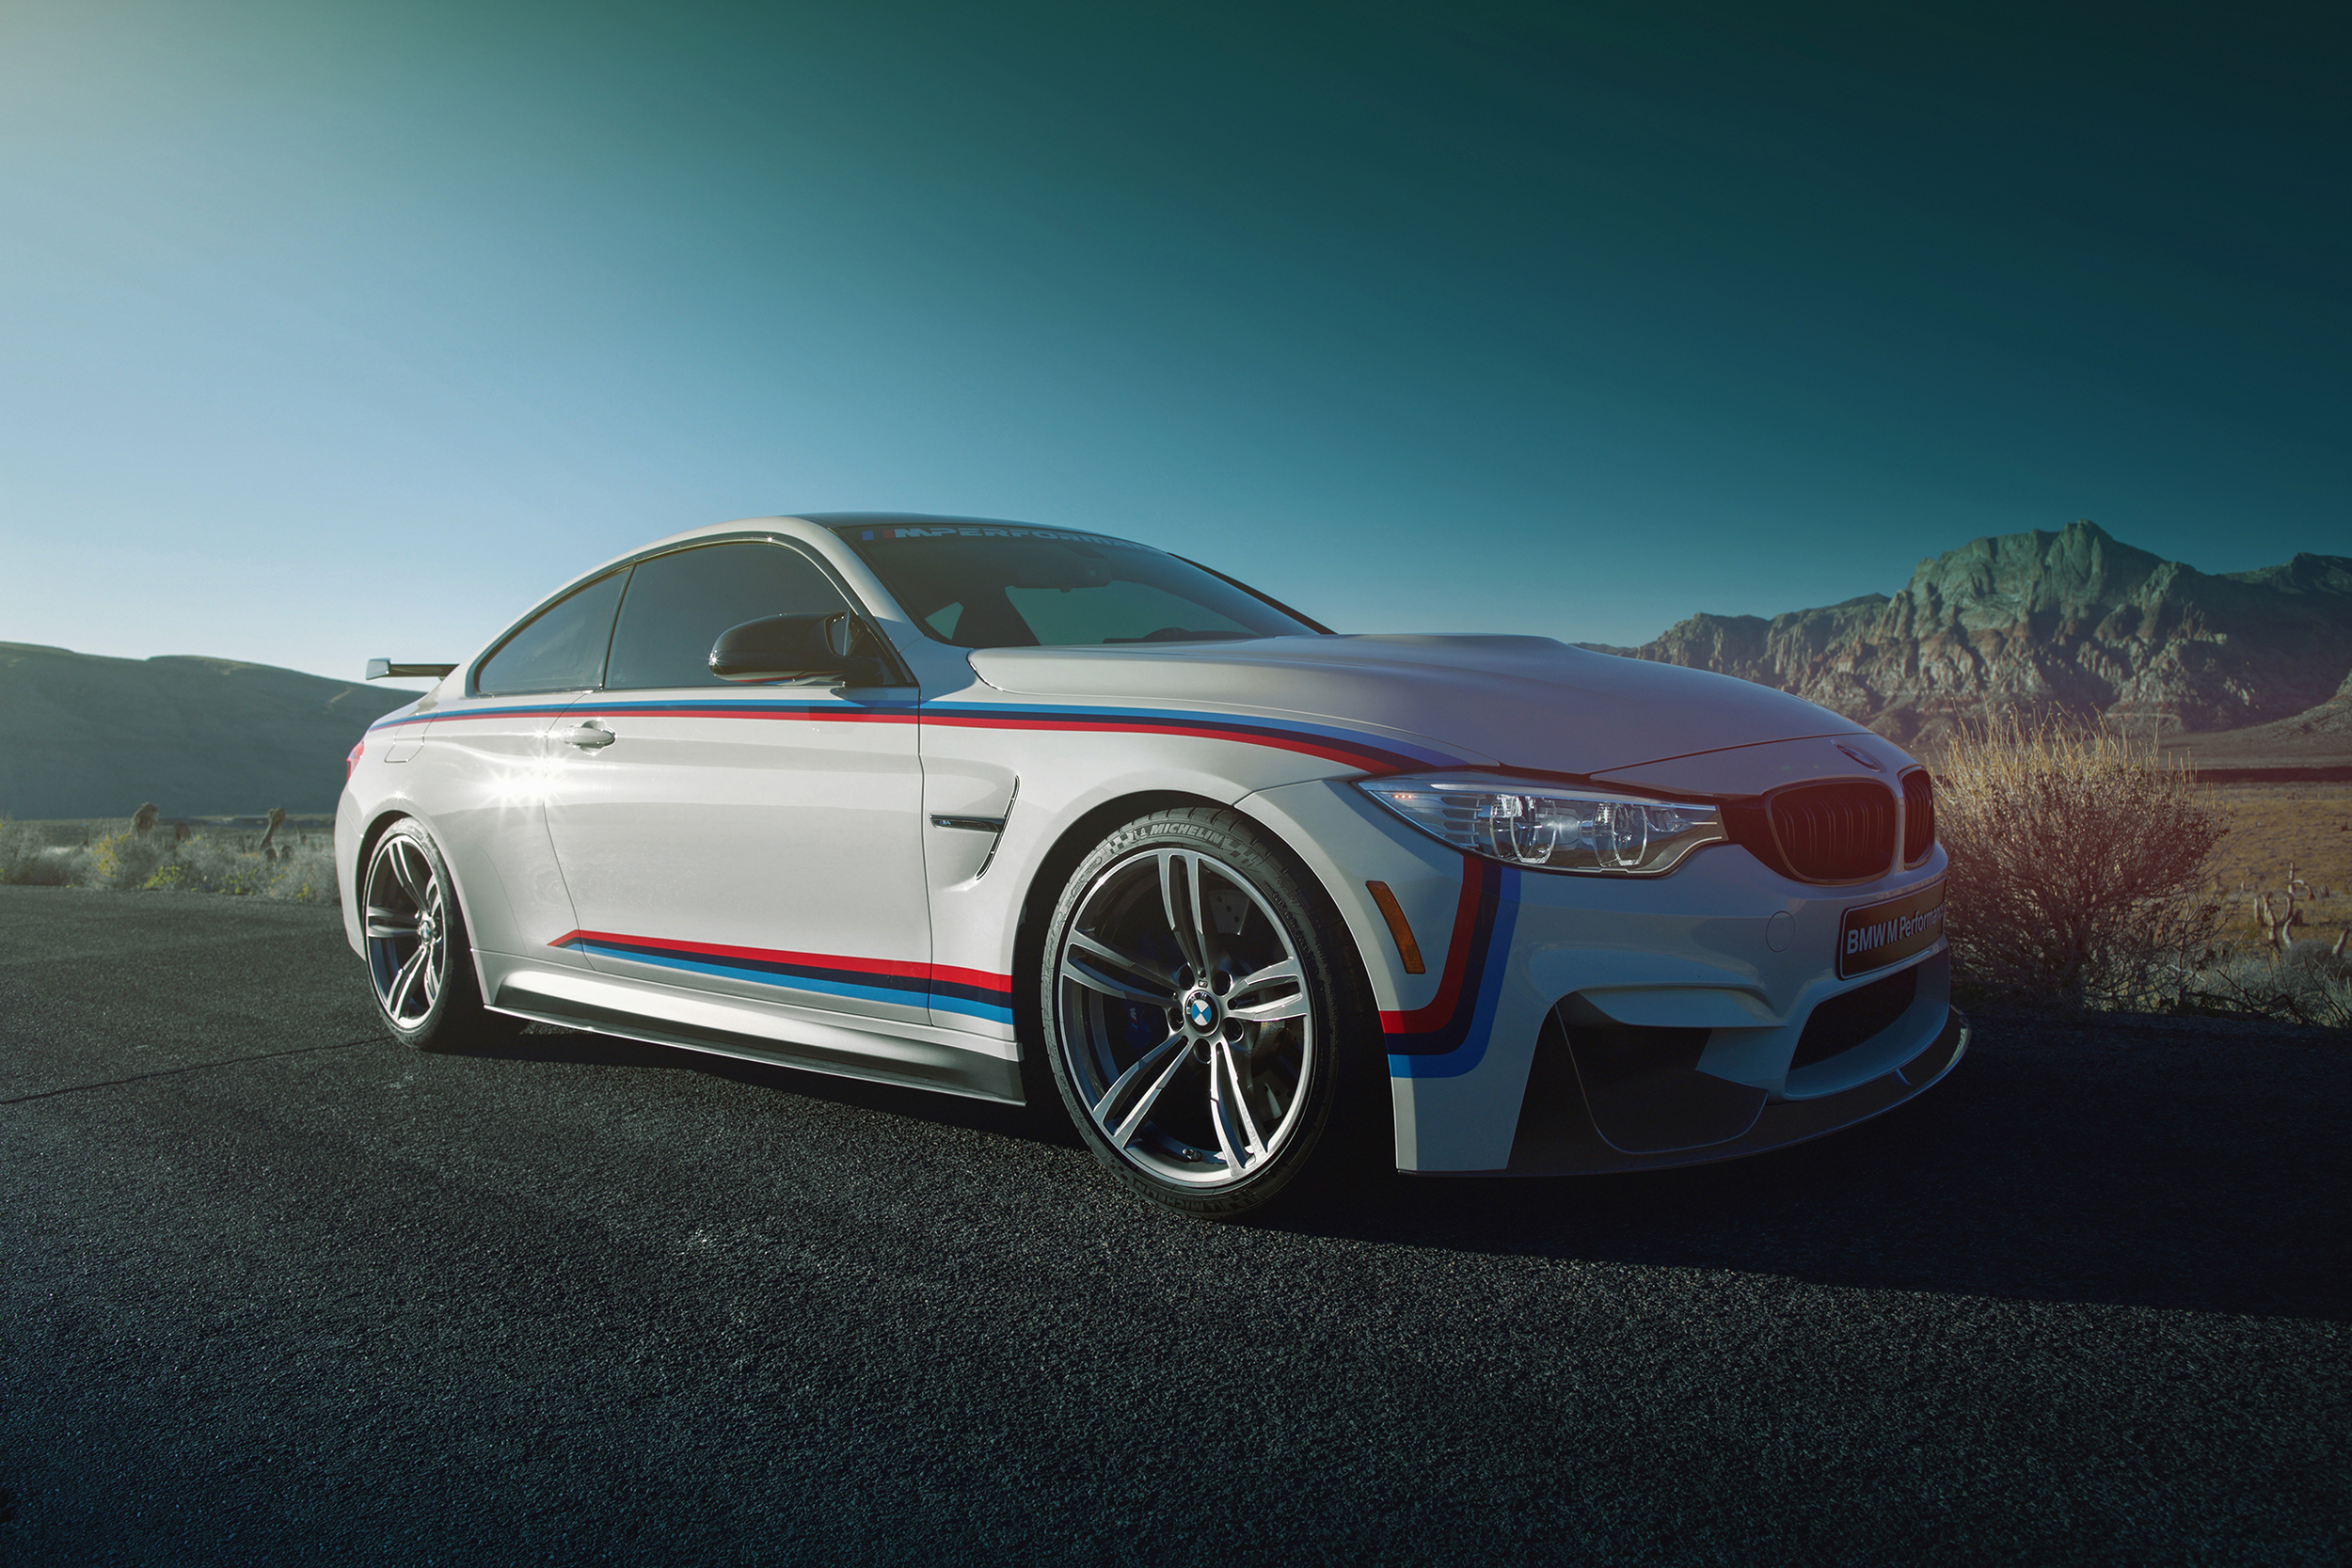 Modified BMW M4 Coupe revealed at SEMA